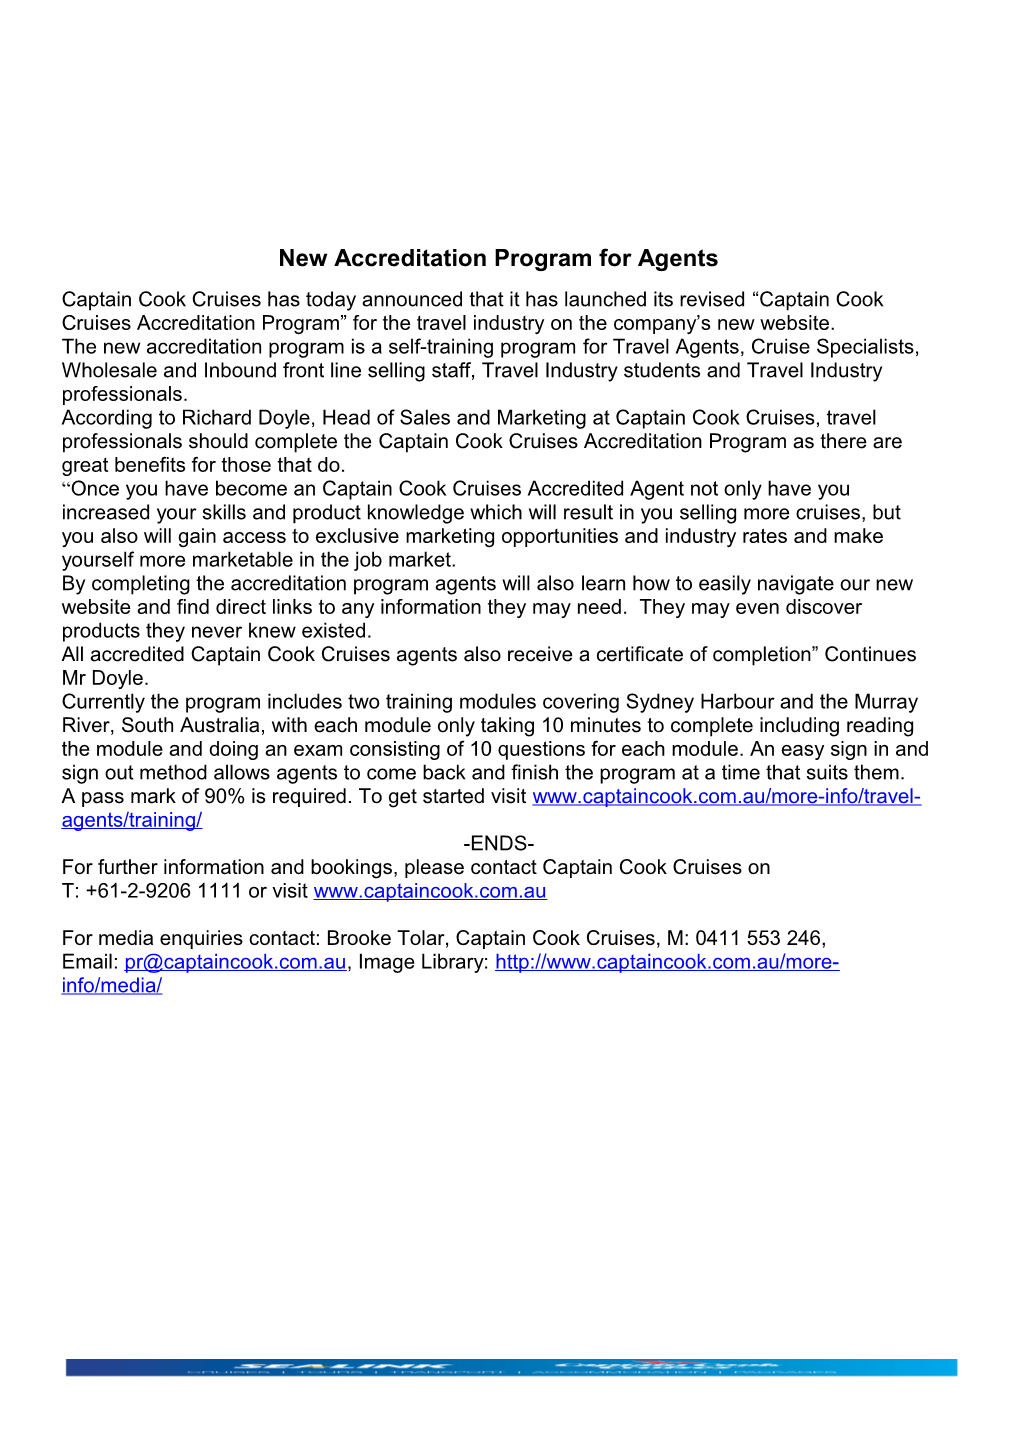 New Accreditation Program for Agents